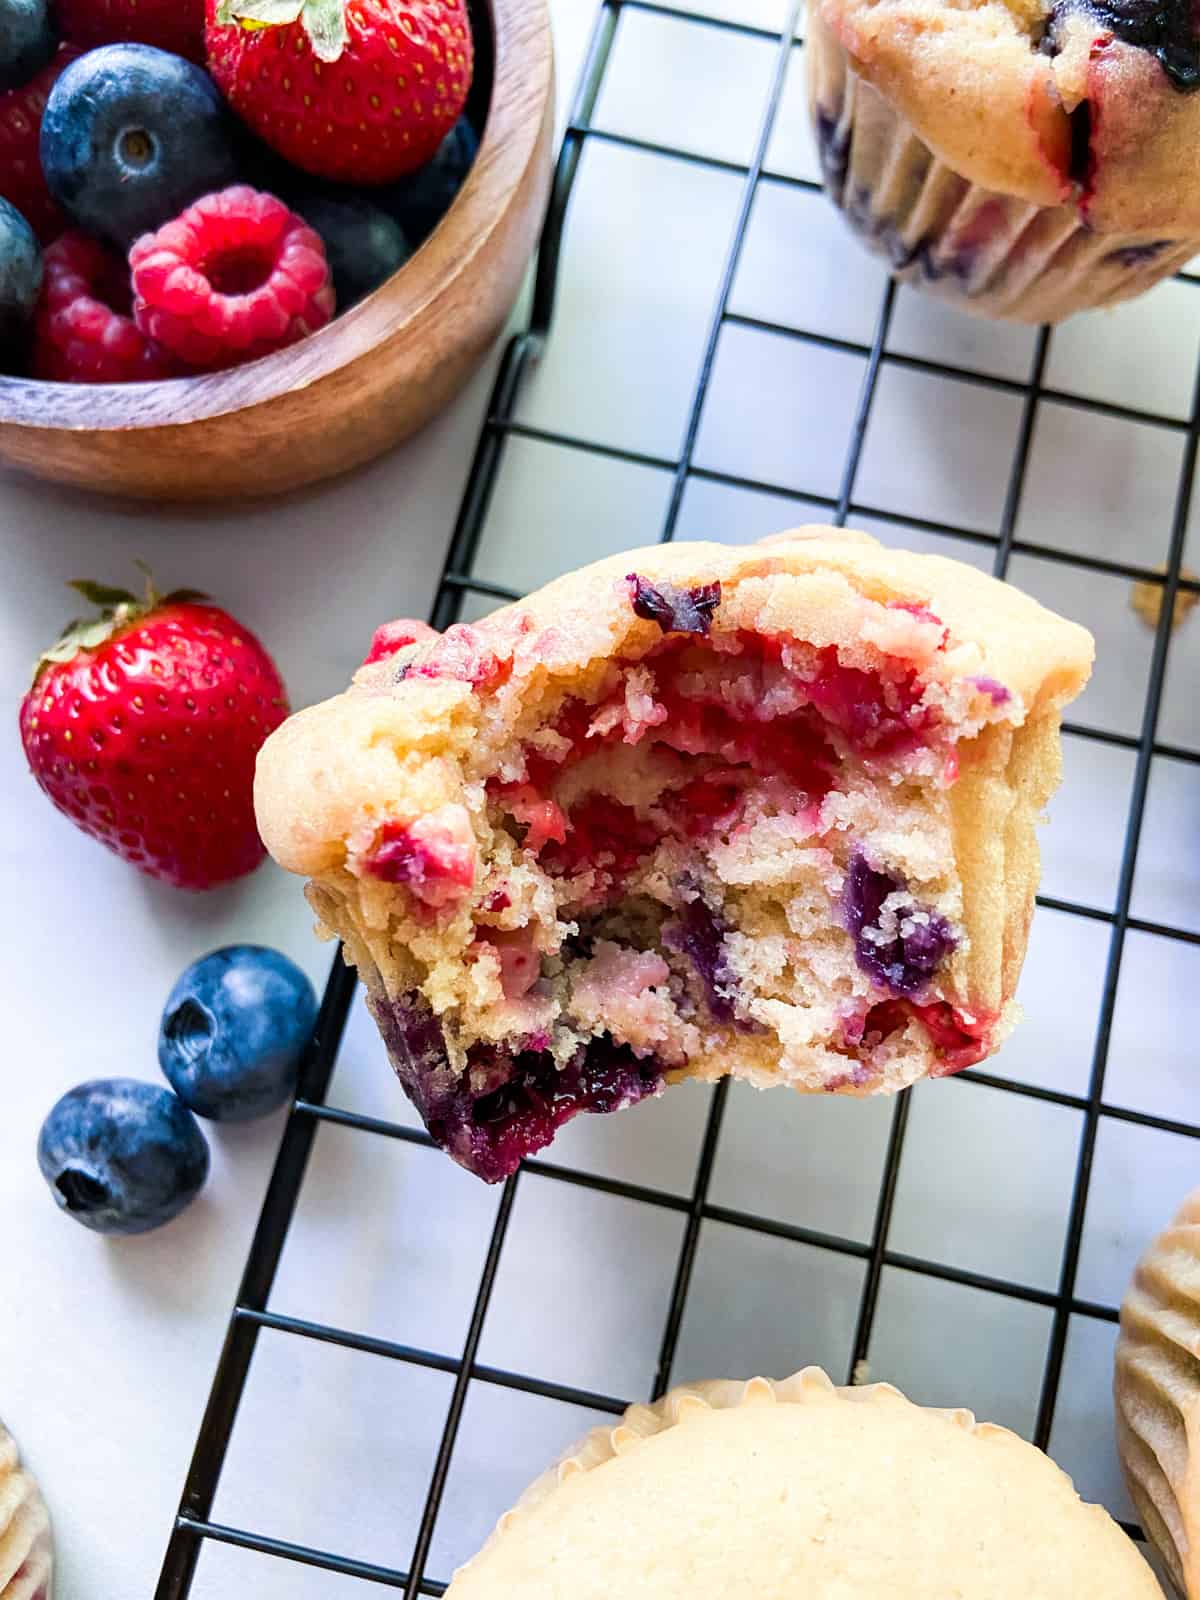 A muffin with a bite taken out of it.